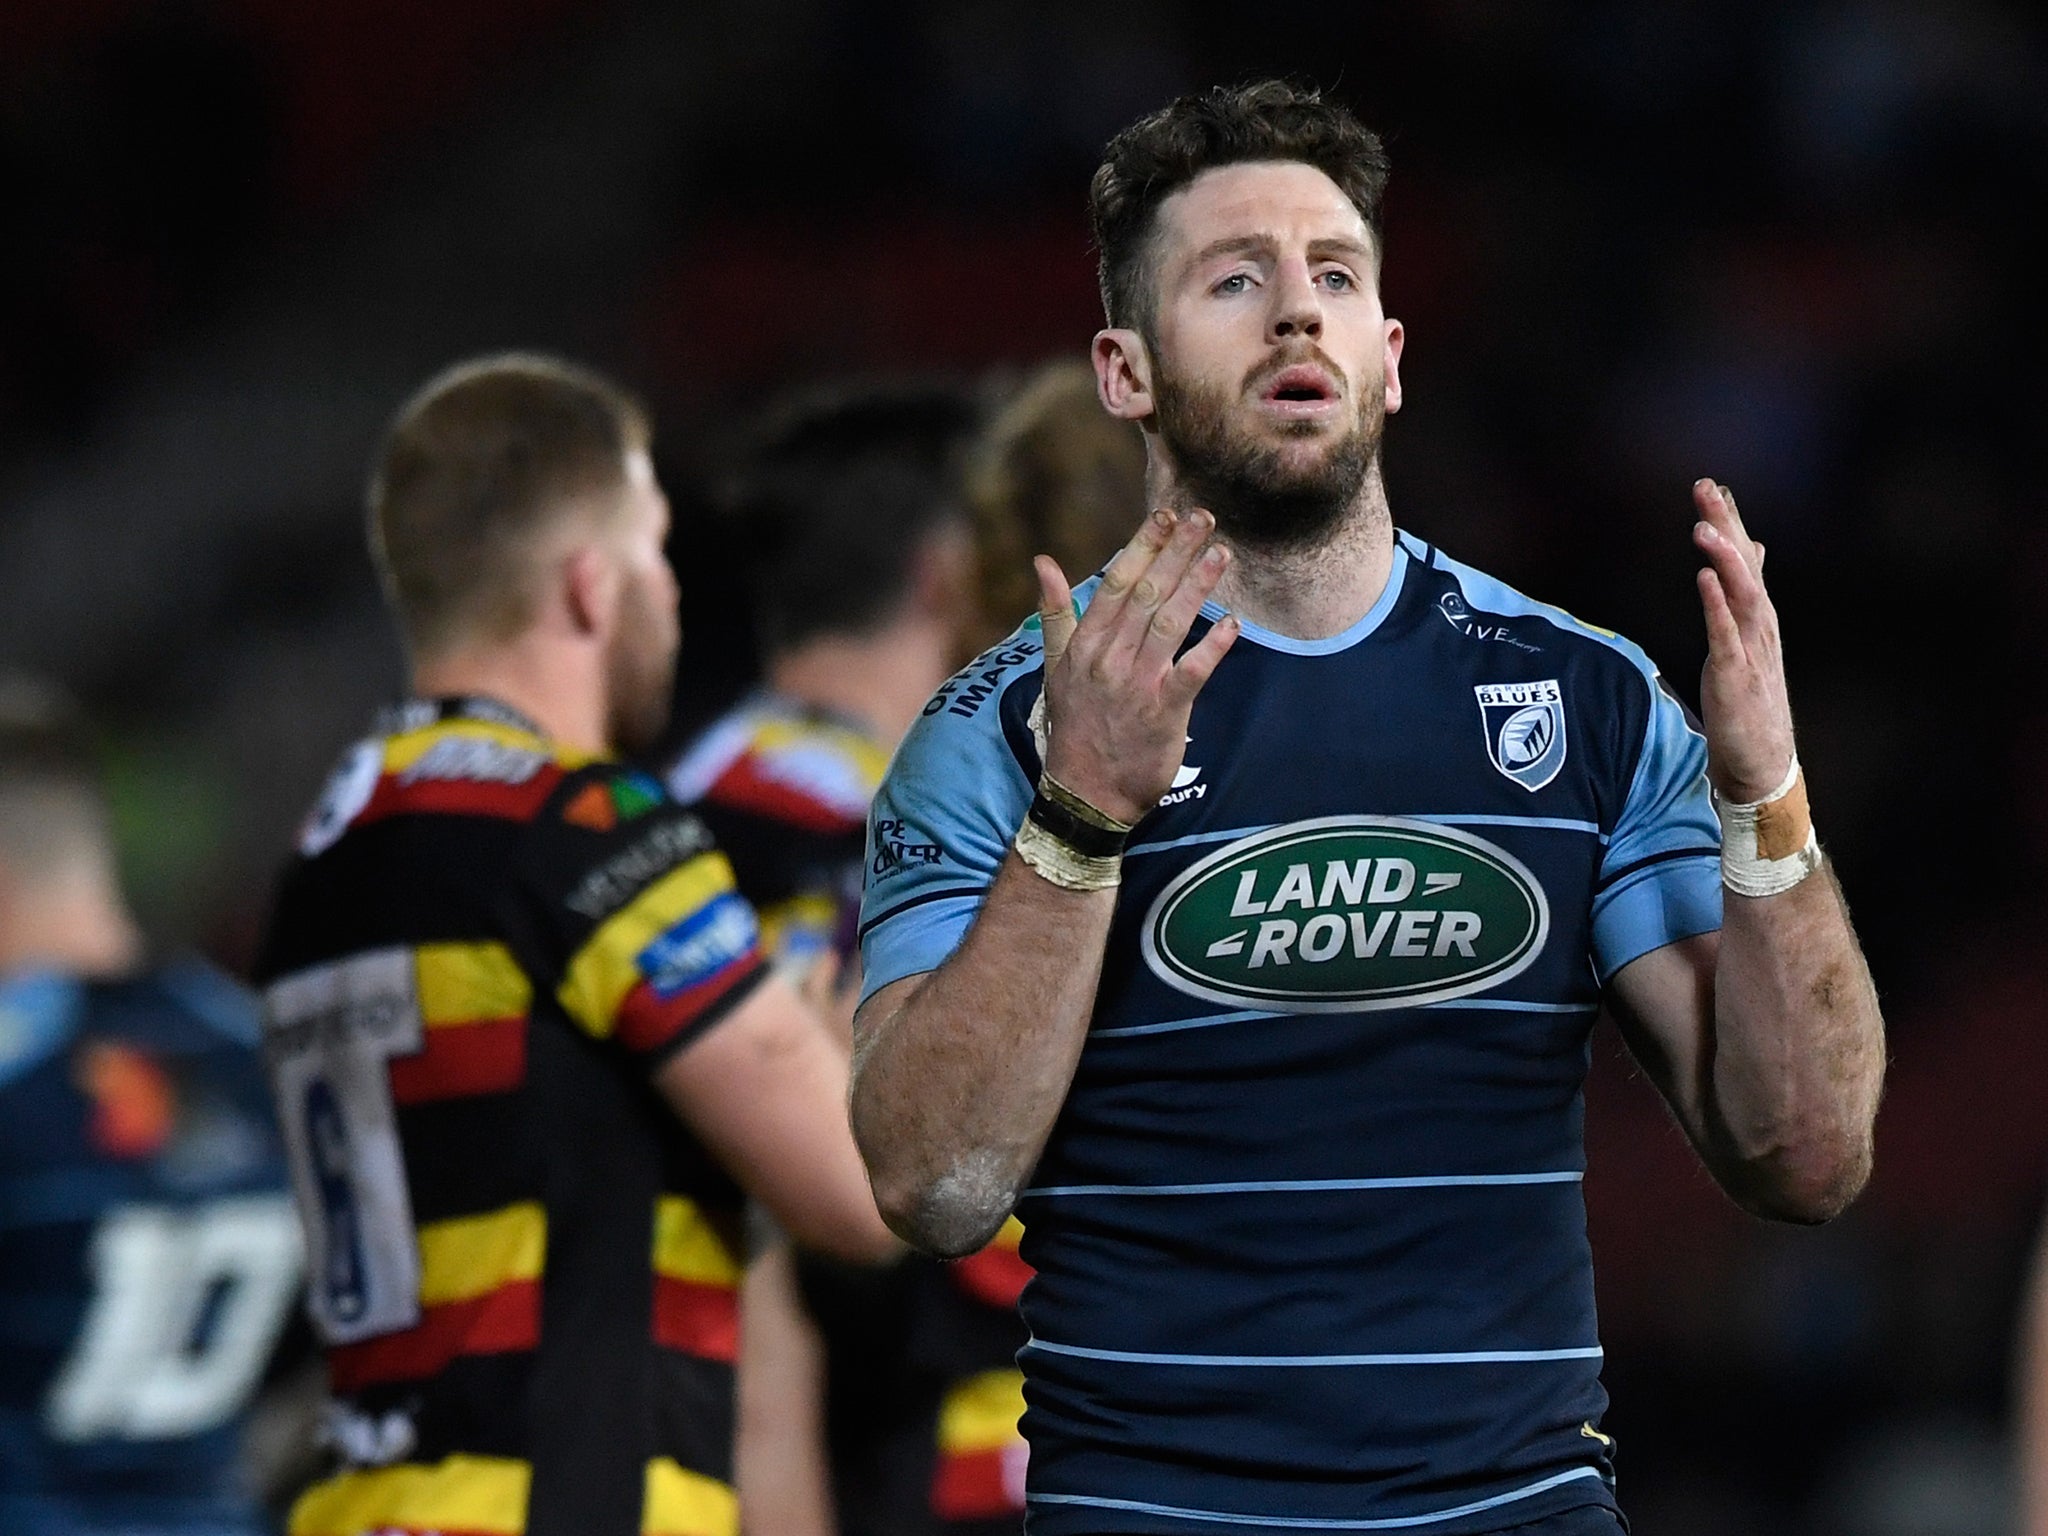 Cuthbert will leave Cardiff Blues at the end of the season